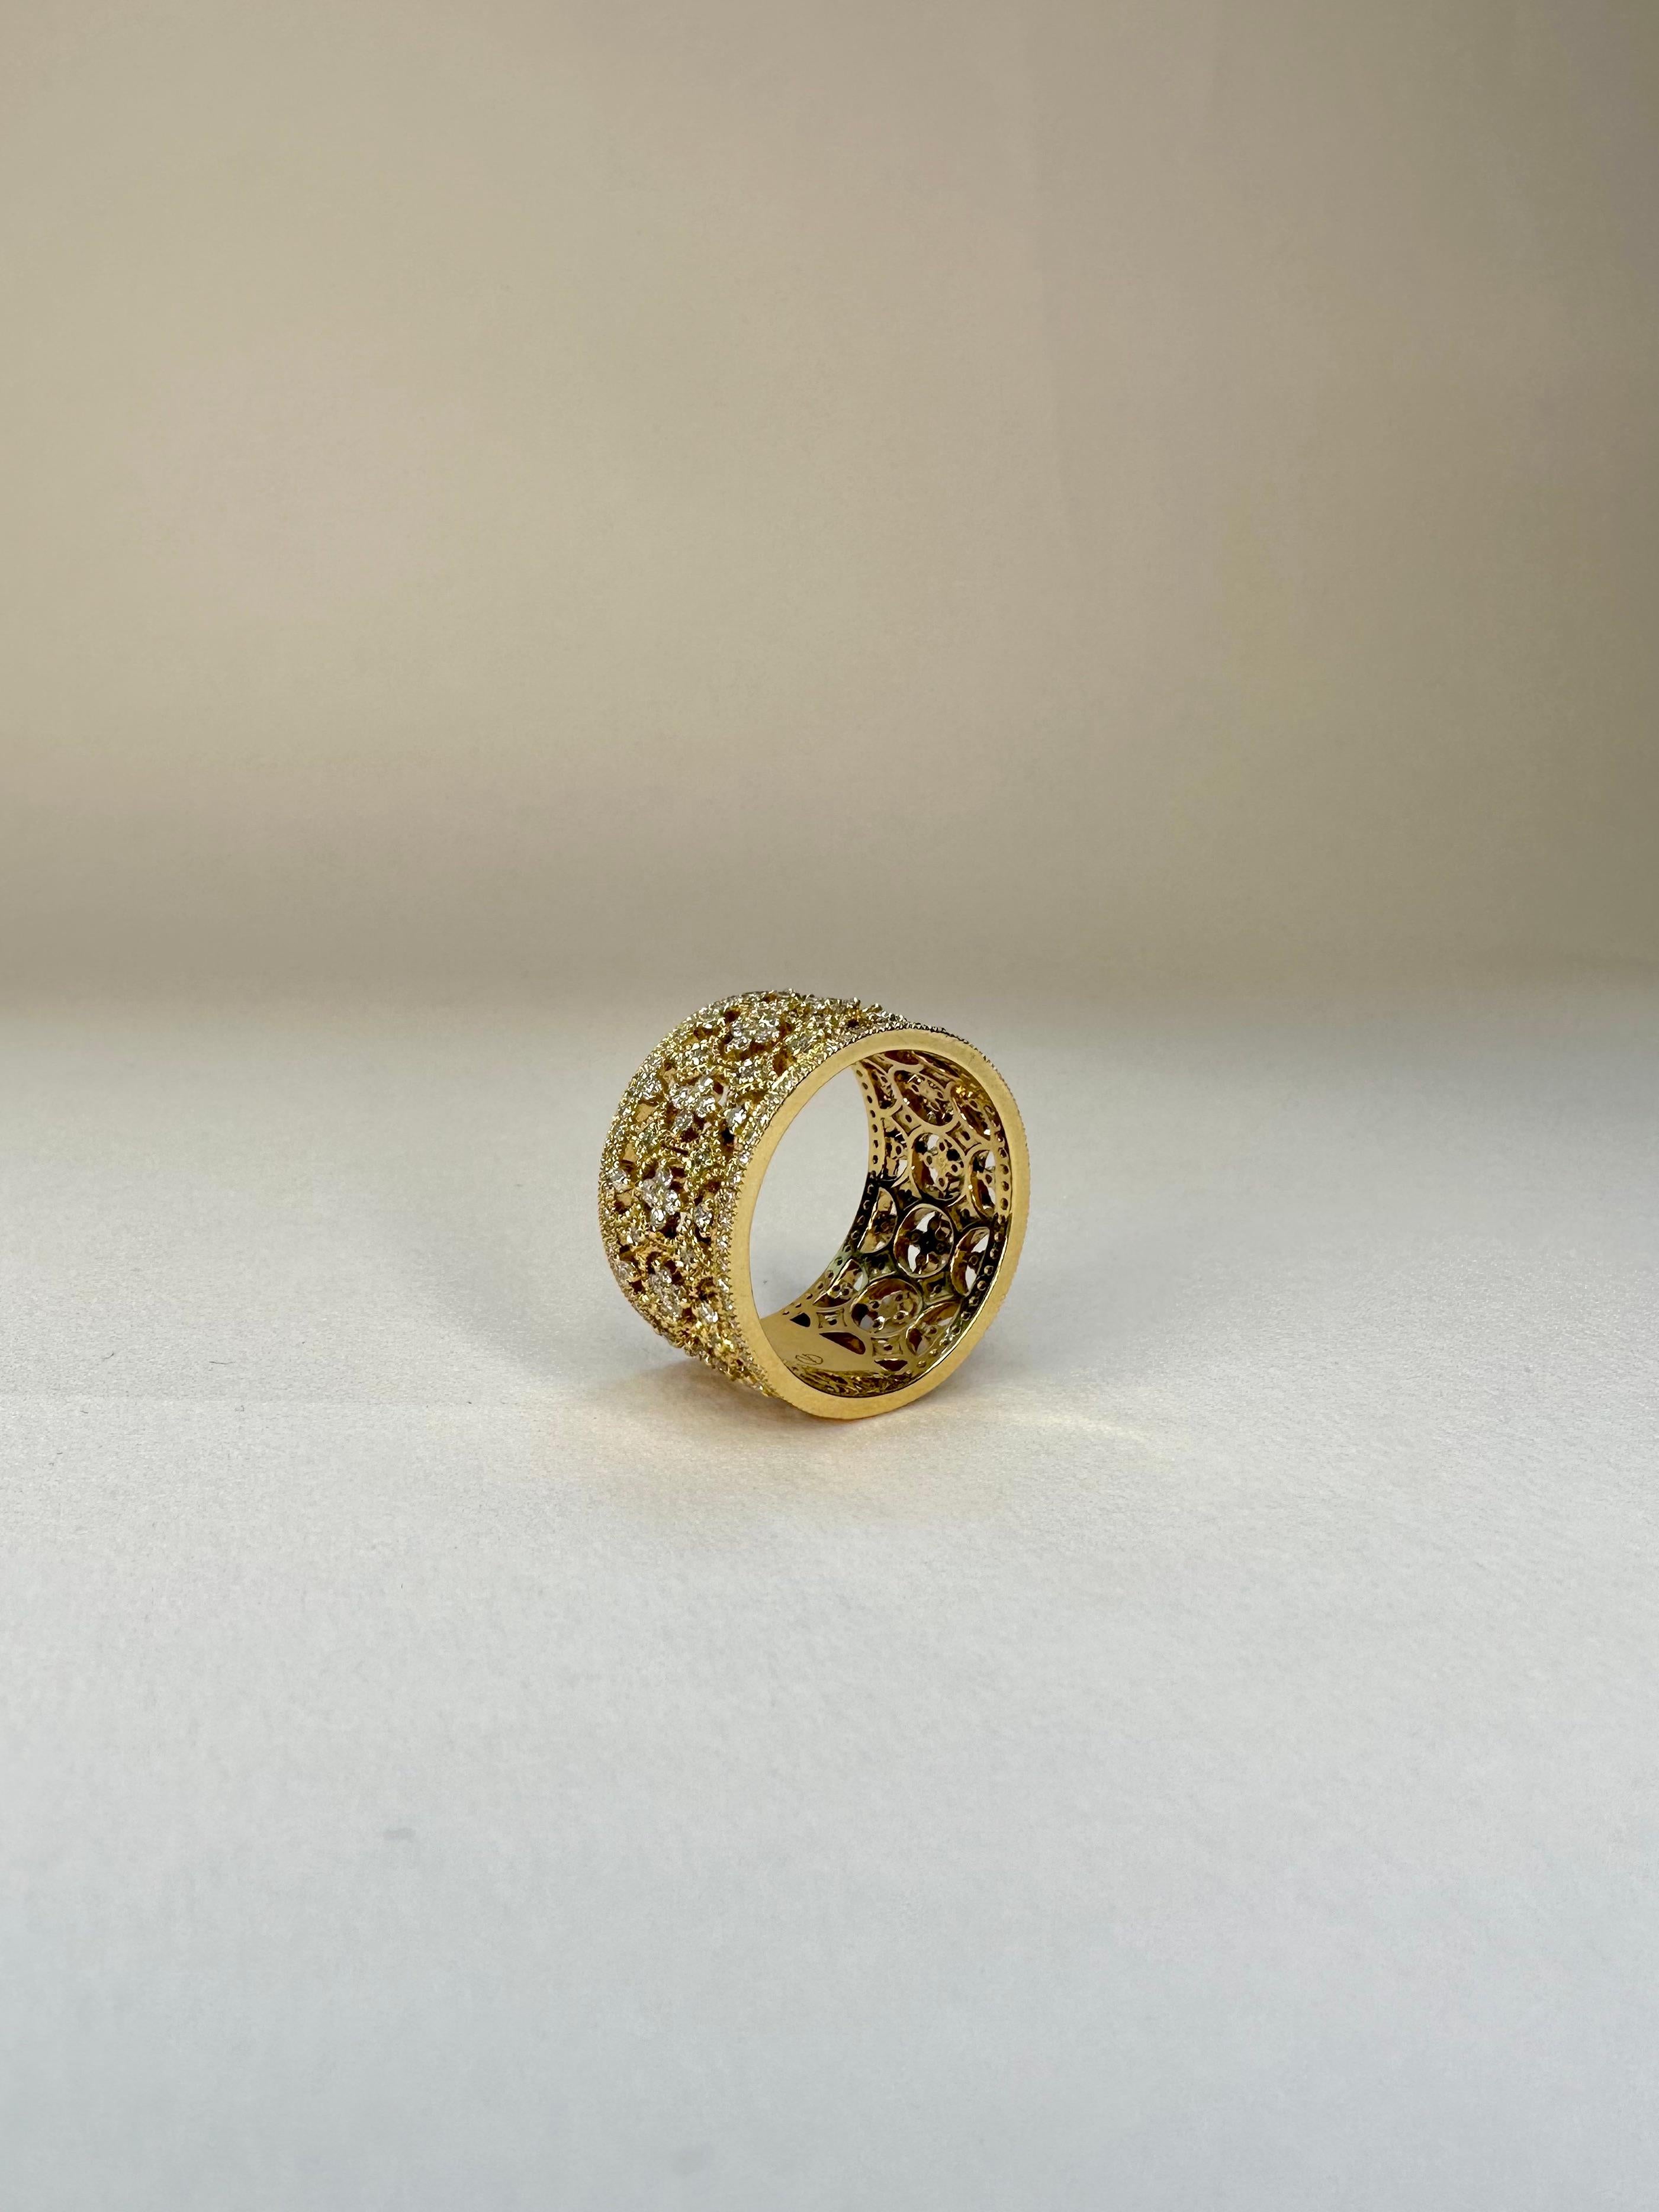 For Sale:  18k Yellow Gold Lace Band Ring 1.16 Cts Of Diamonds Milgrain Setting 5